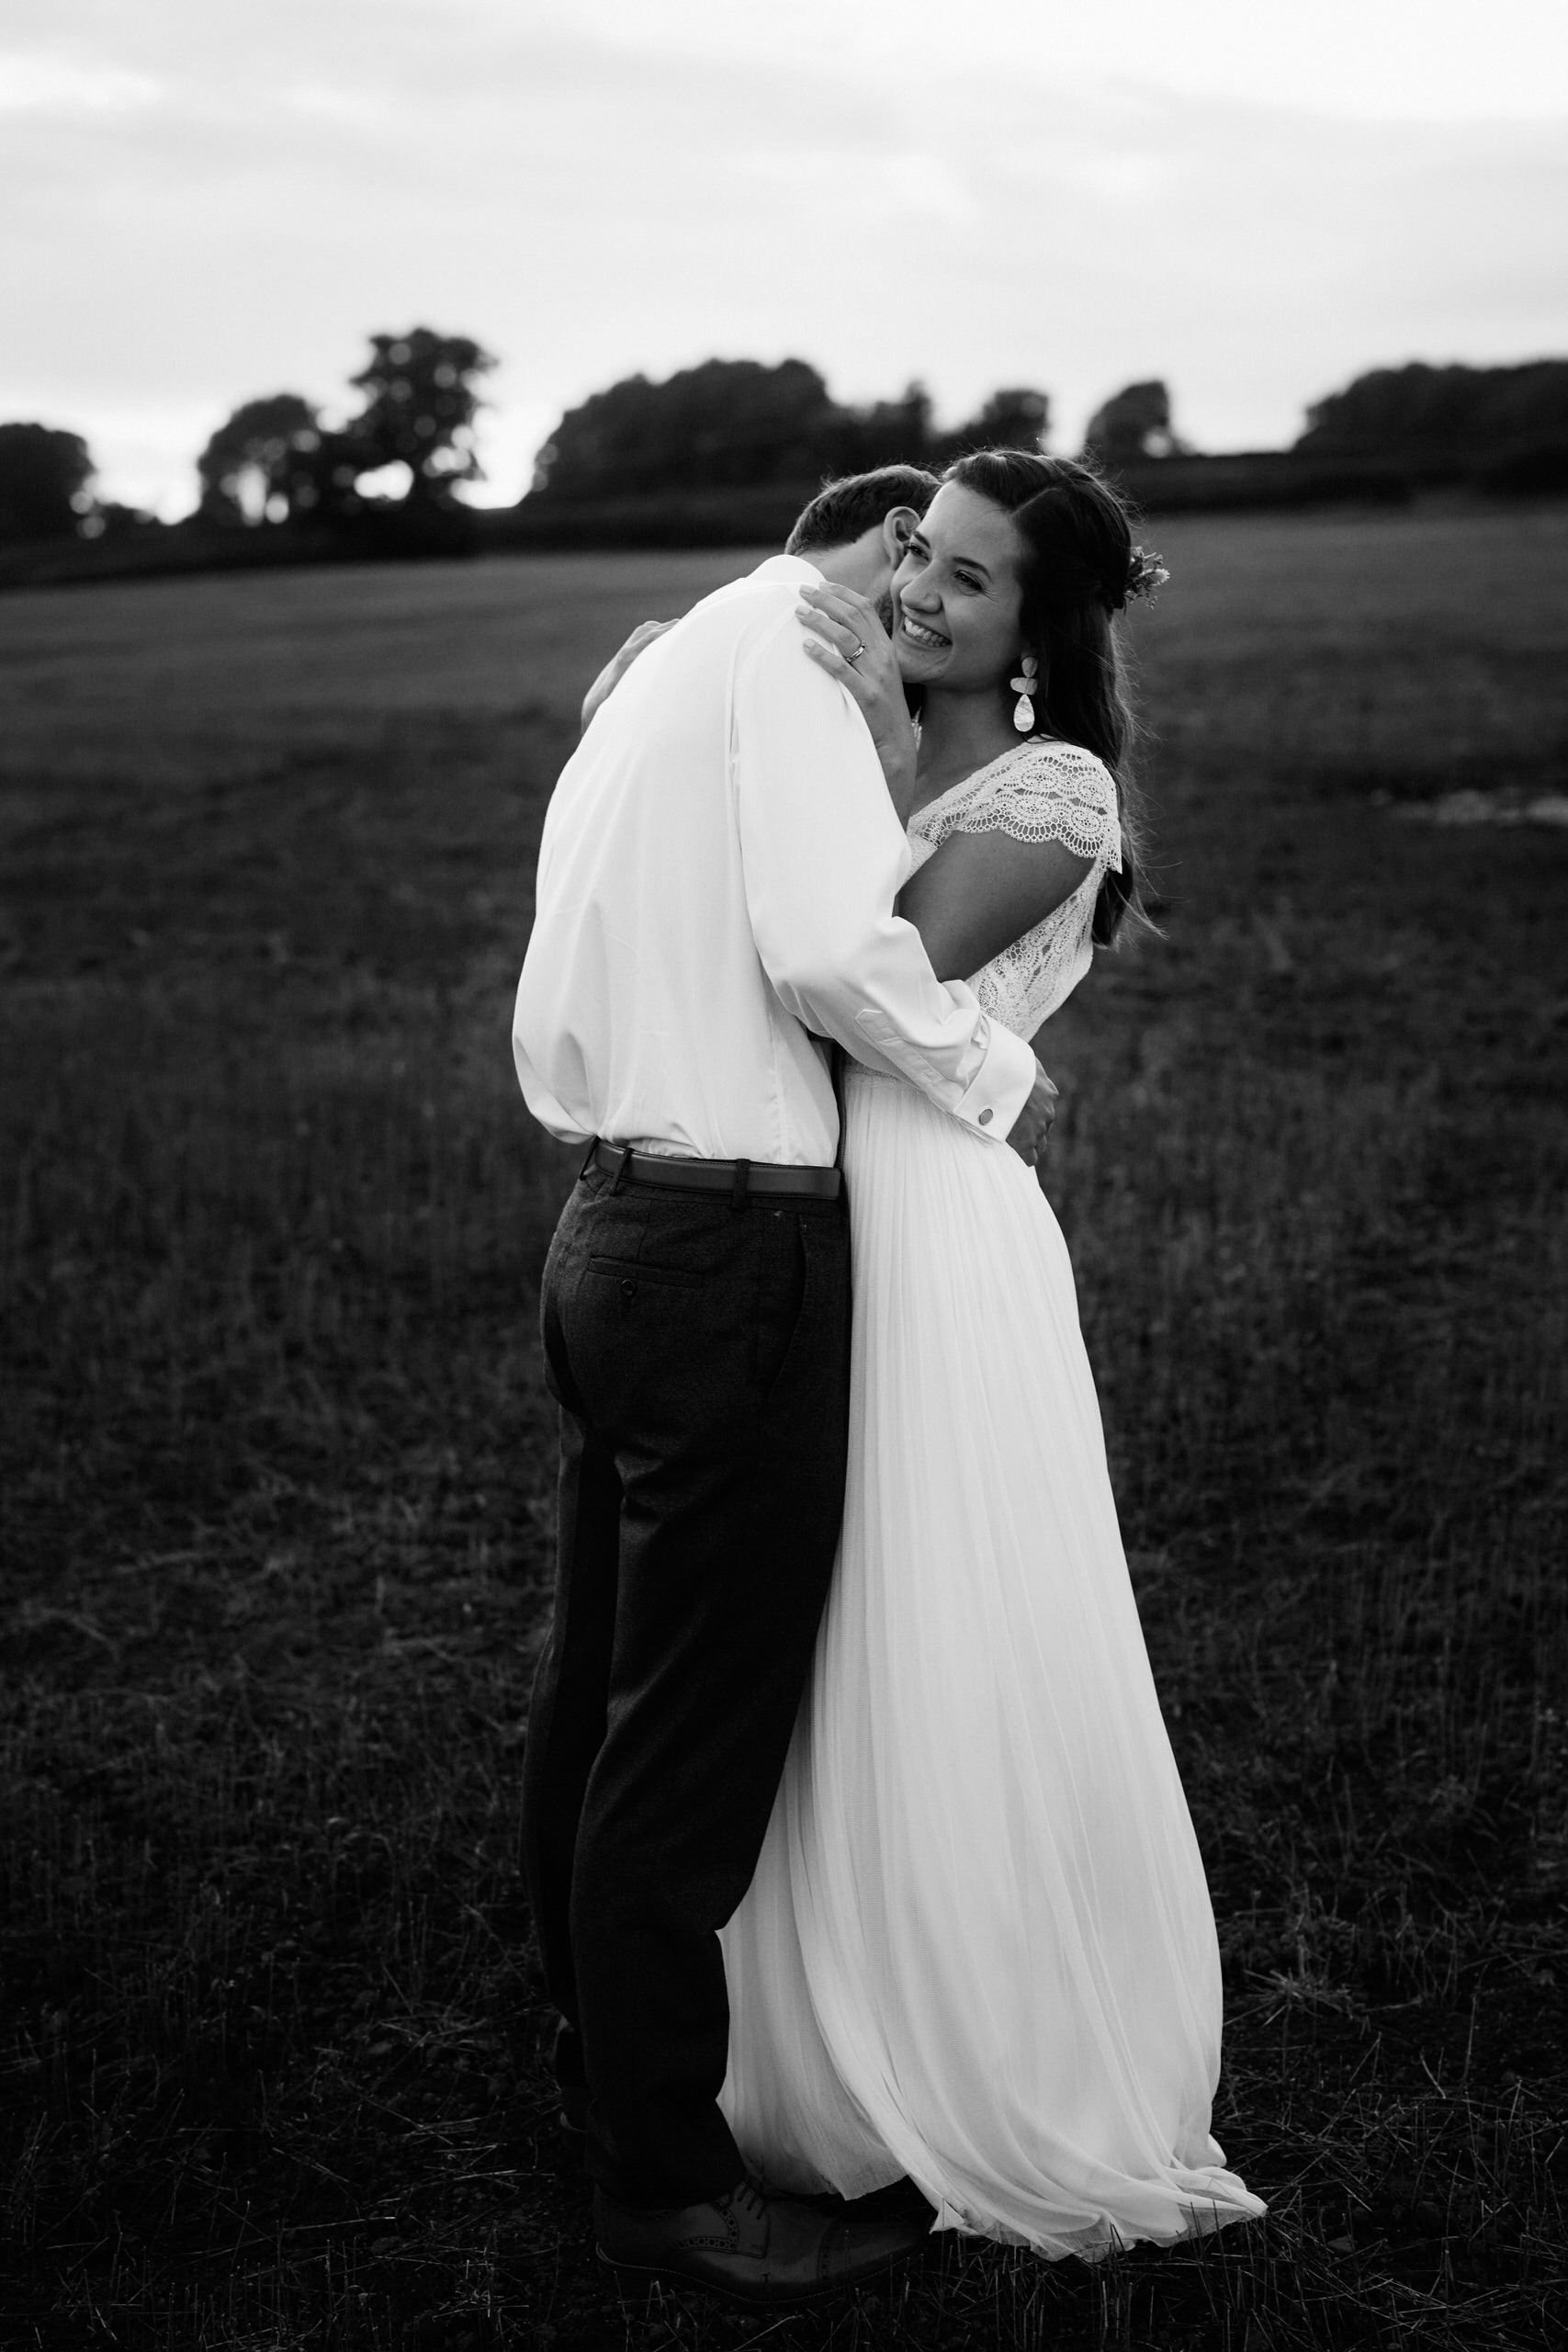 A couple getting married is embracing in an open field.